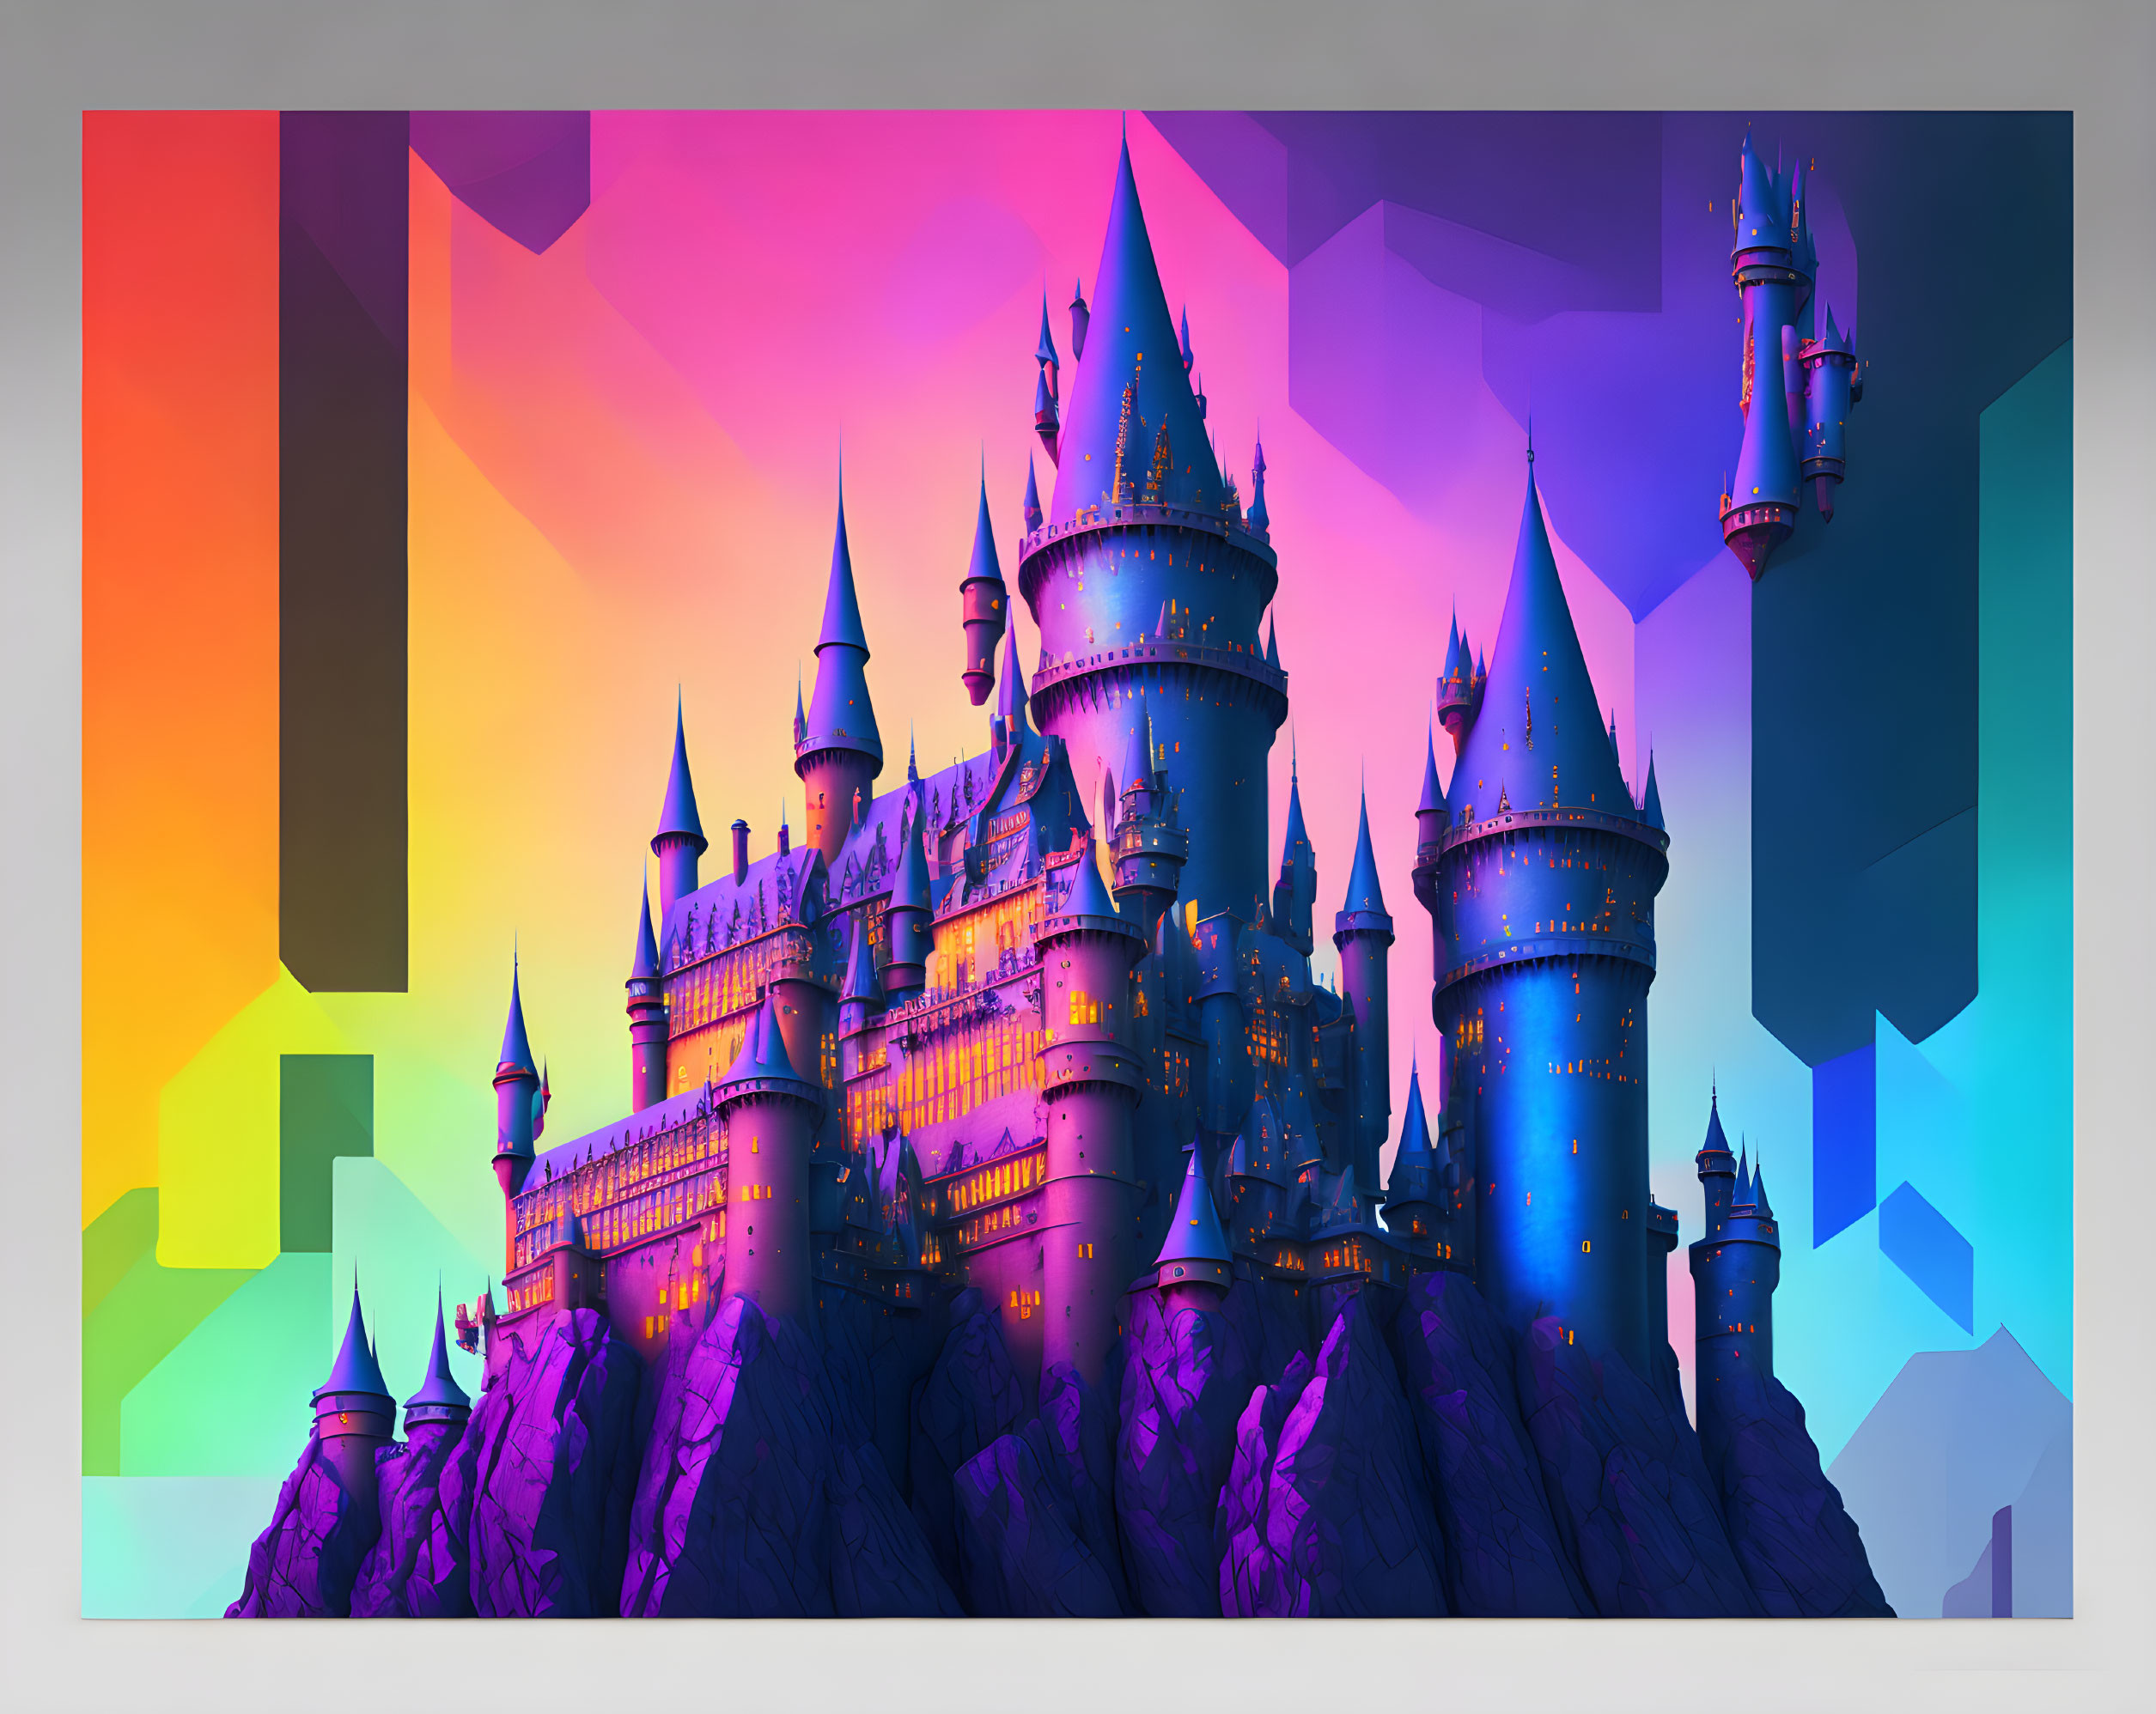 Fantastical castle with spires on vibrant, geometric background